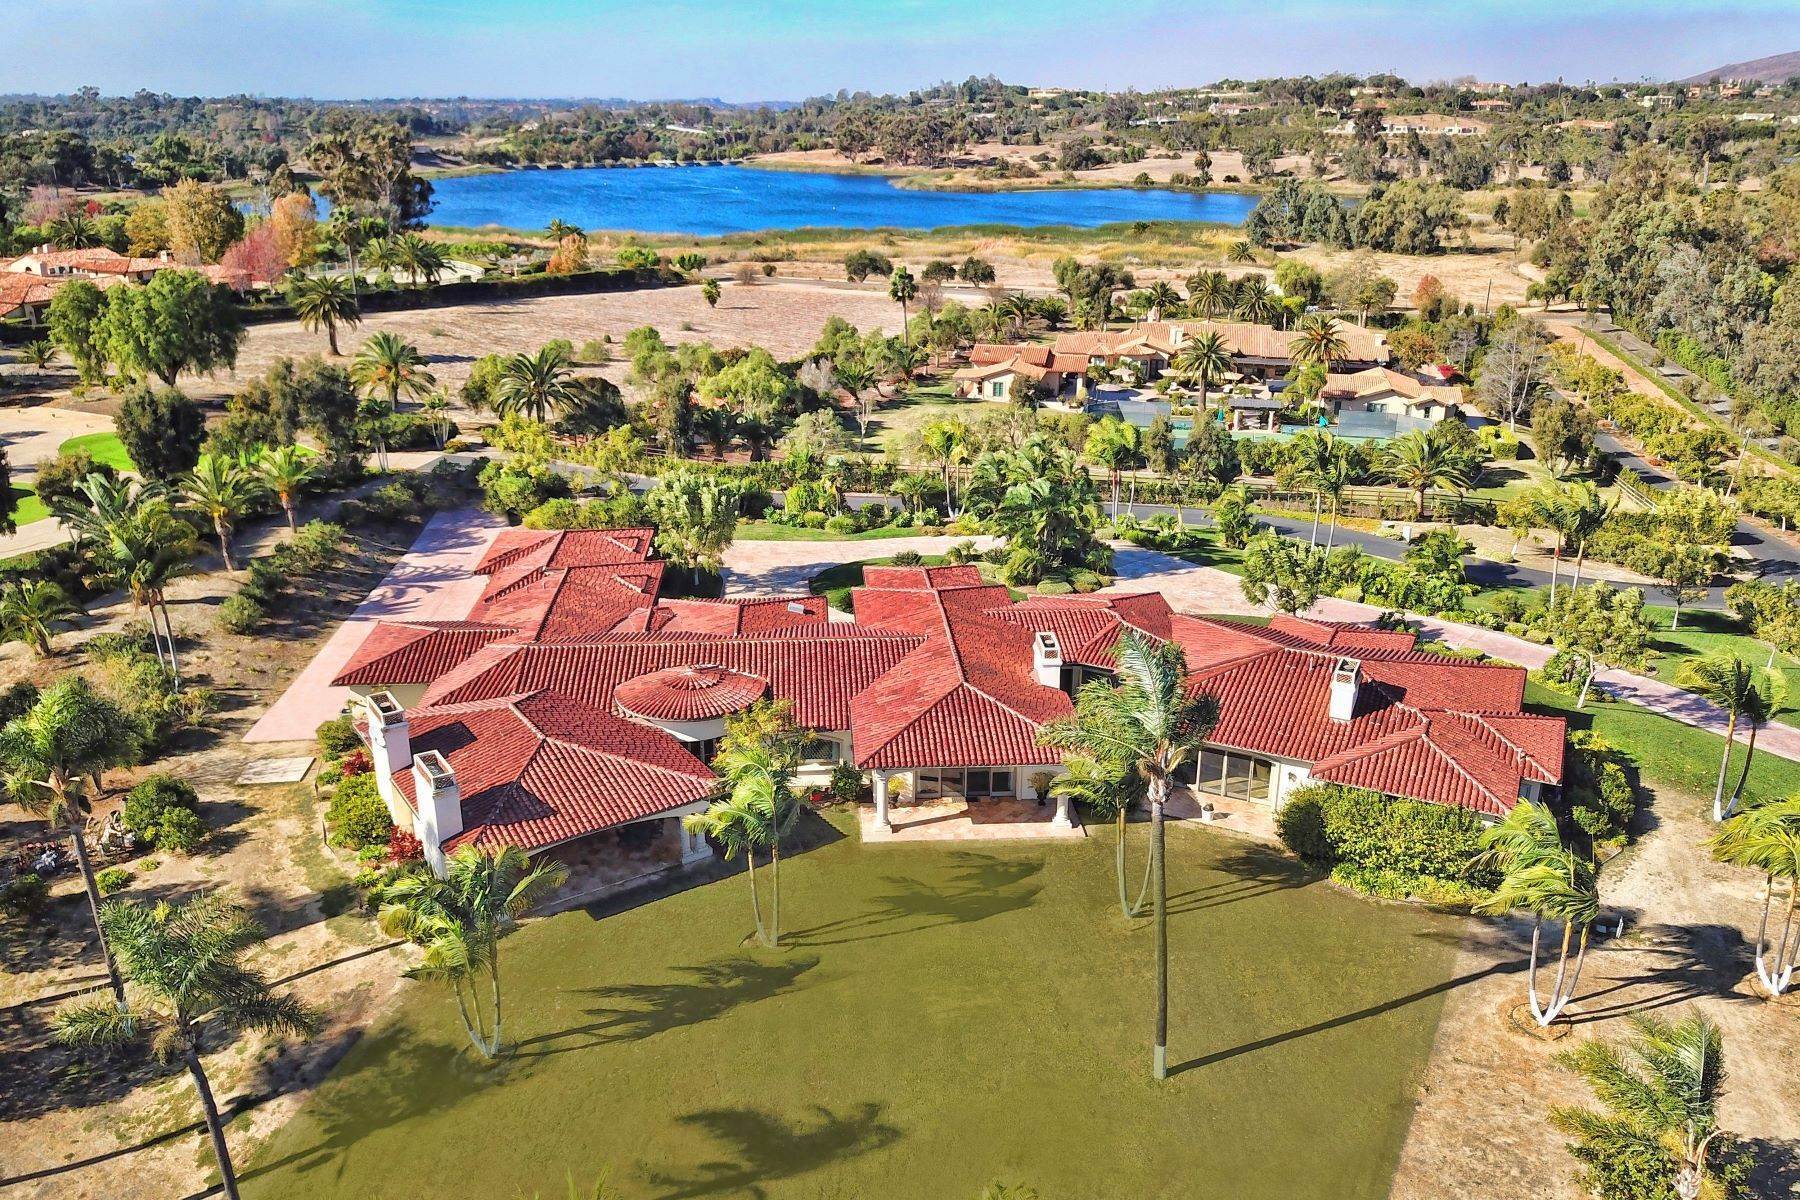 Single Family Homes for Sale at Opulent, Gated Estate with Acres Adjacent to Miles of Equestrian Trails! 6625 Lago Lindo Rancho Santa Fe, California 92067 United States